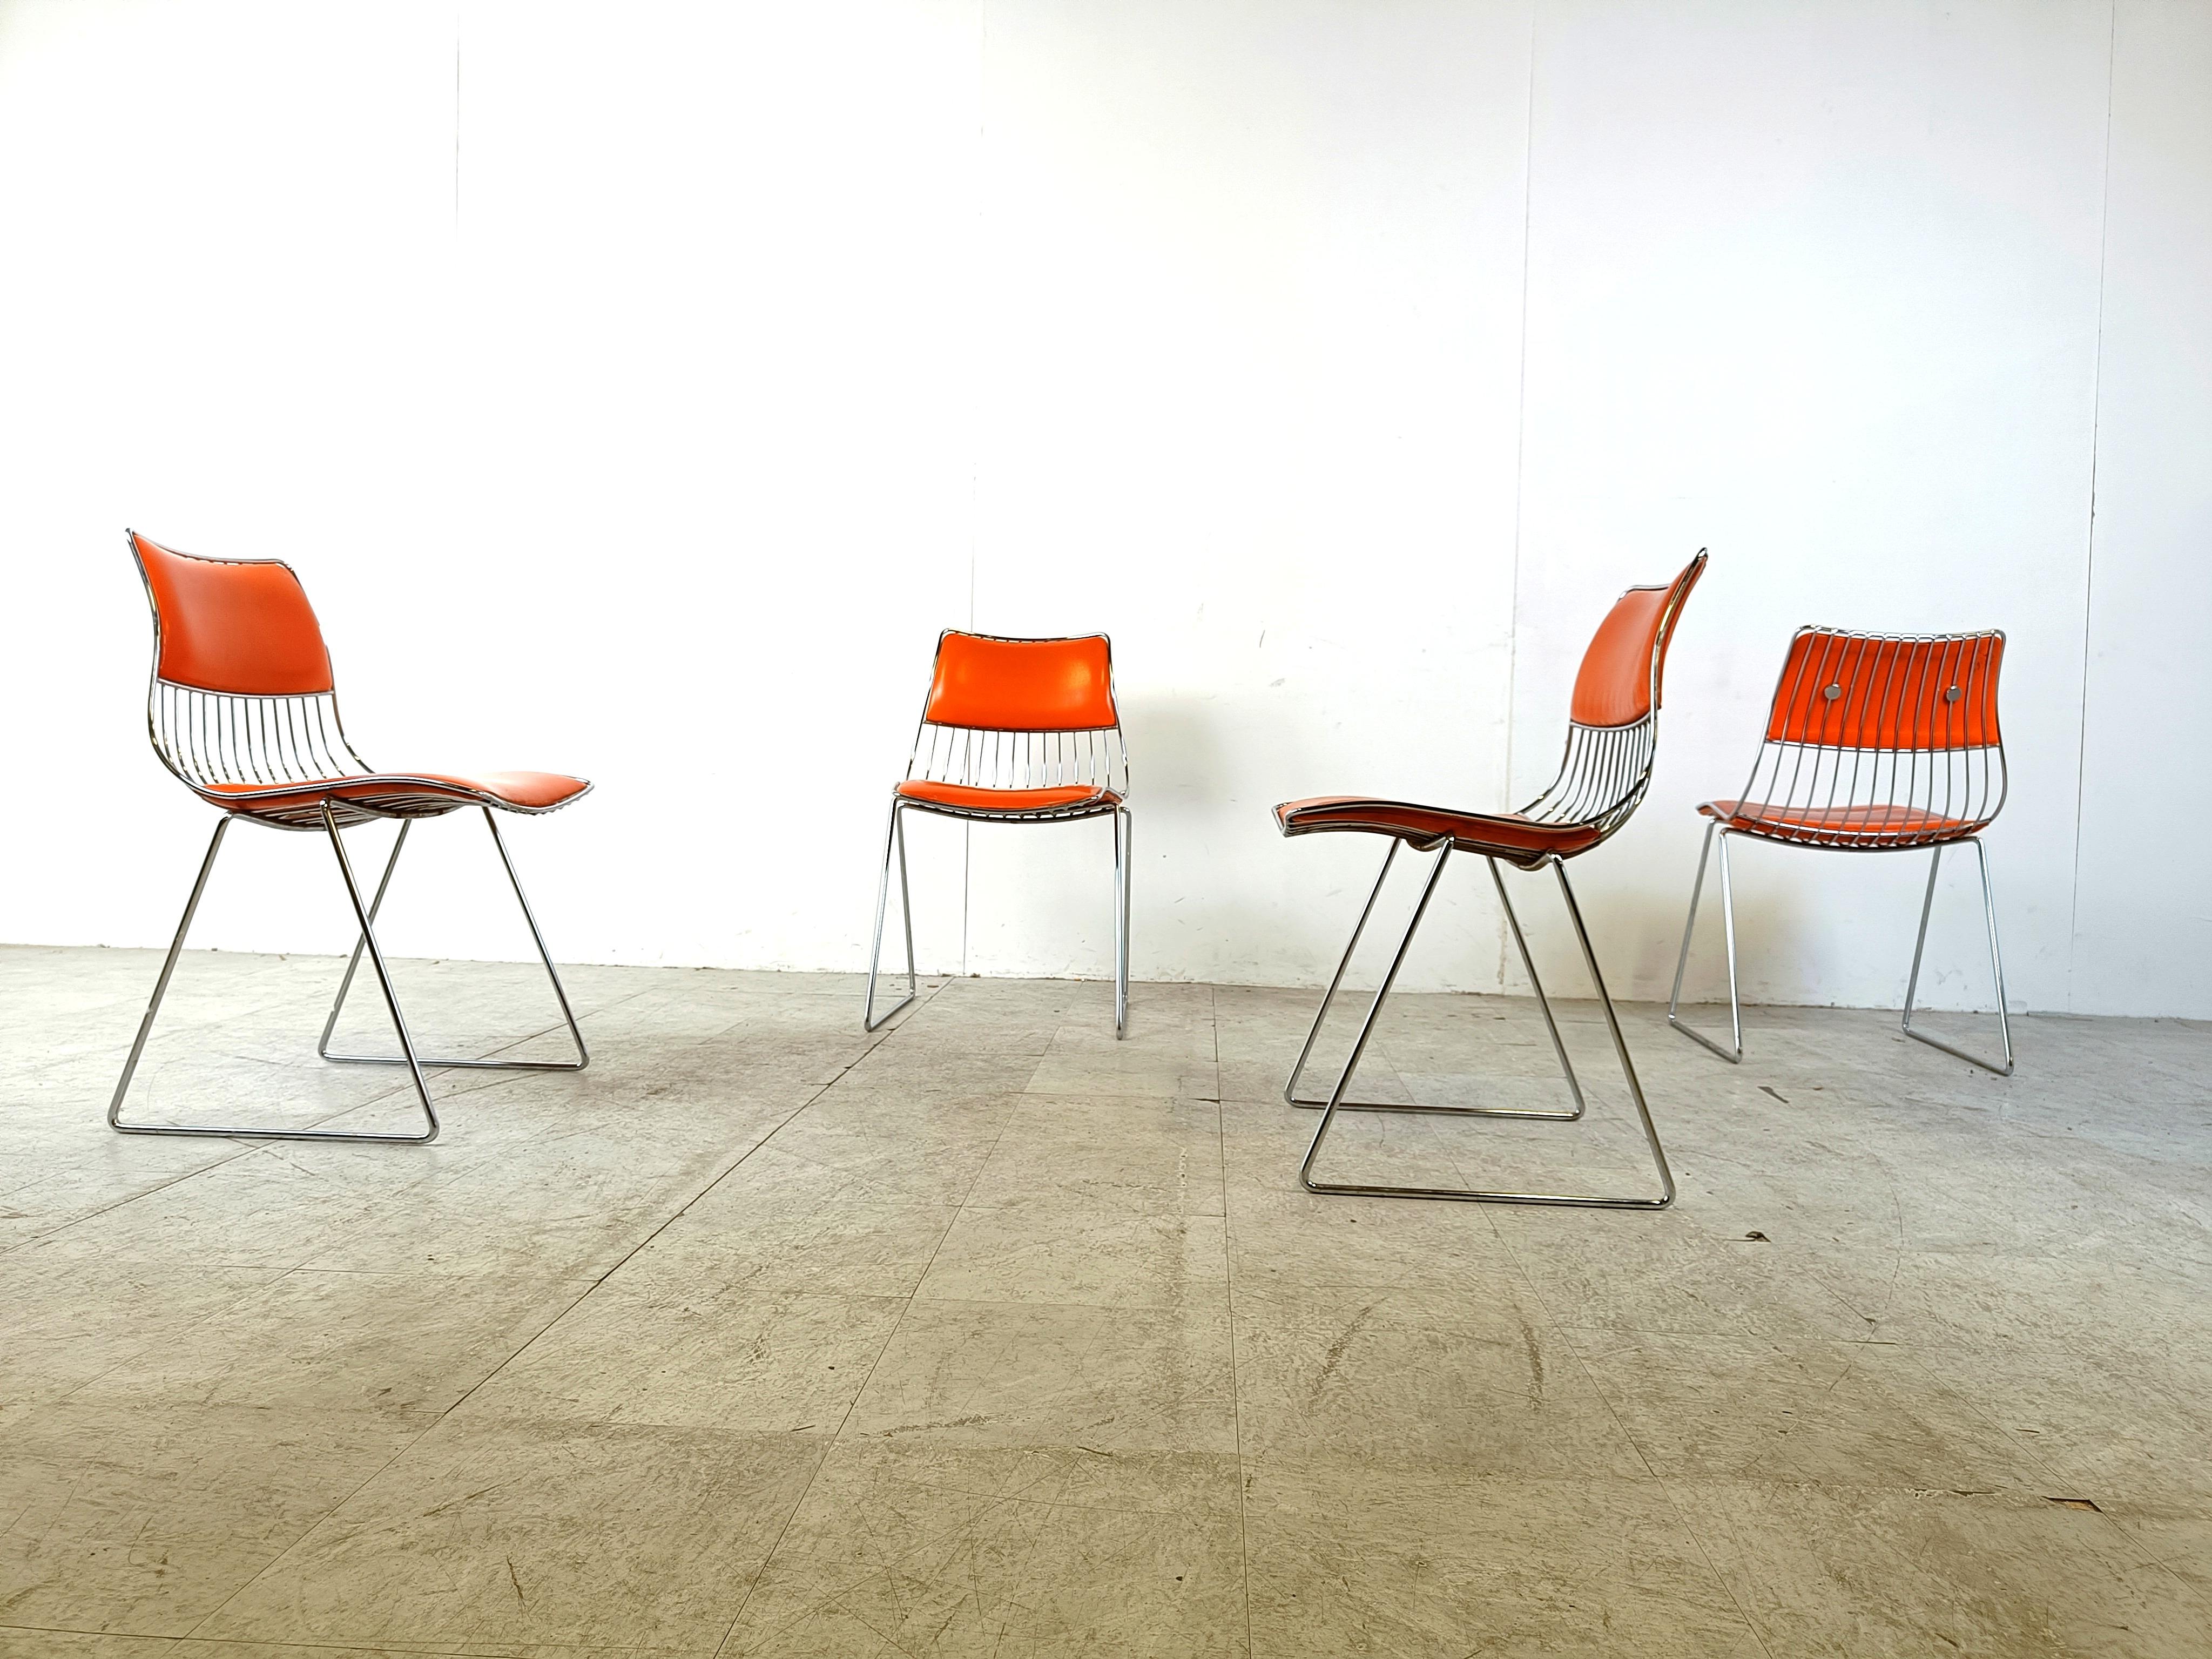 Faux Leather Set of 4 dining chairs by Rudi Verelst for Novalux, 1970s For Sale